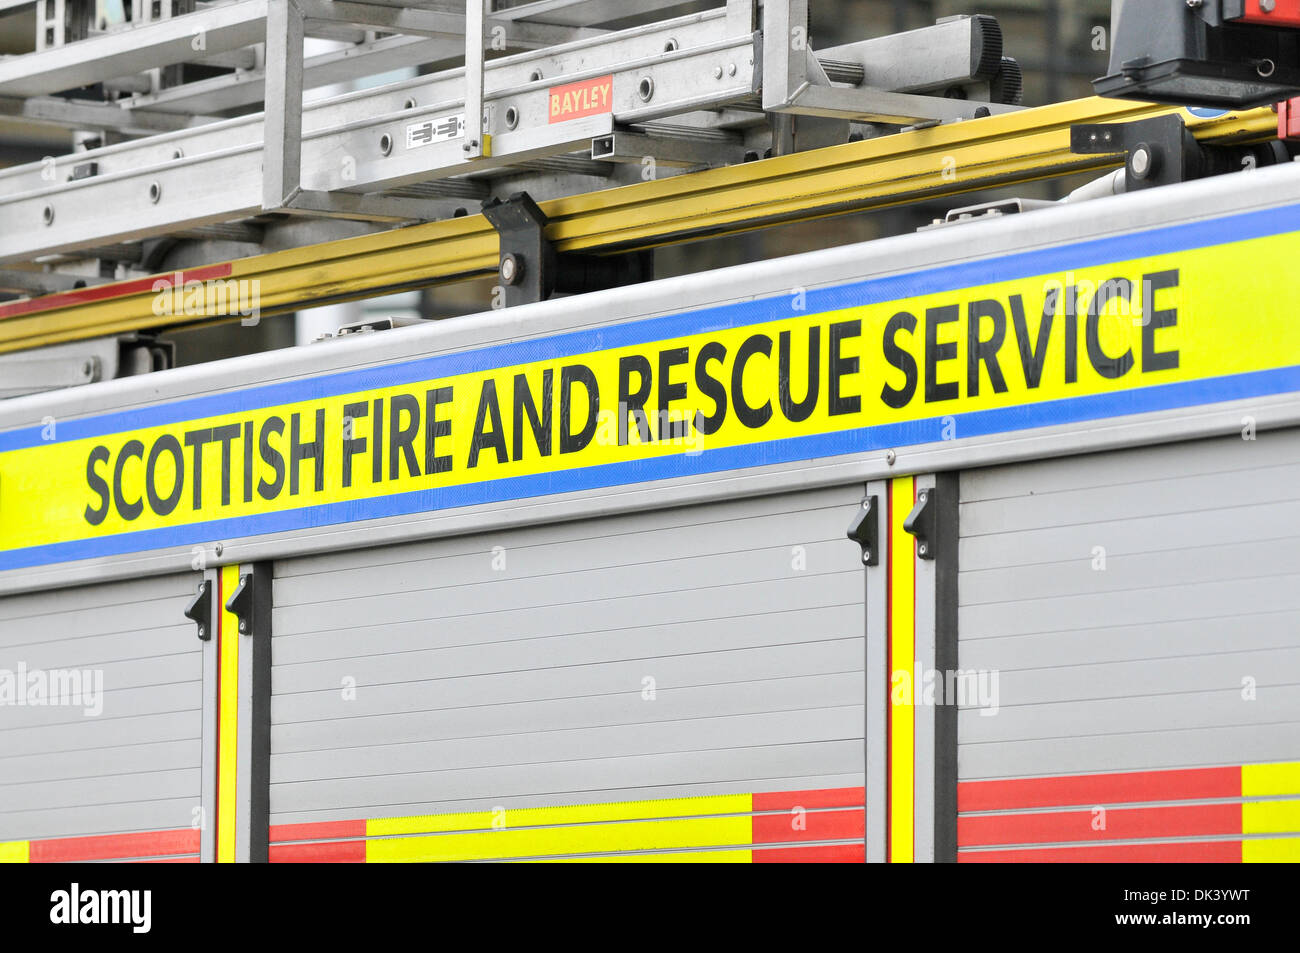 Image of the side of a fire engine with the logo 'Scottish Fire and Rescue Service'. Stock Photo